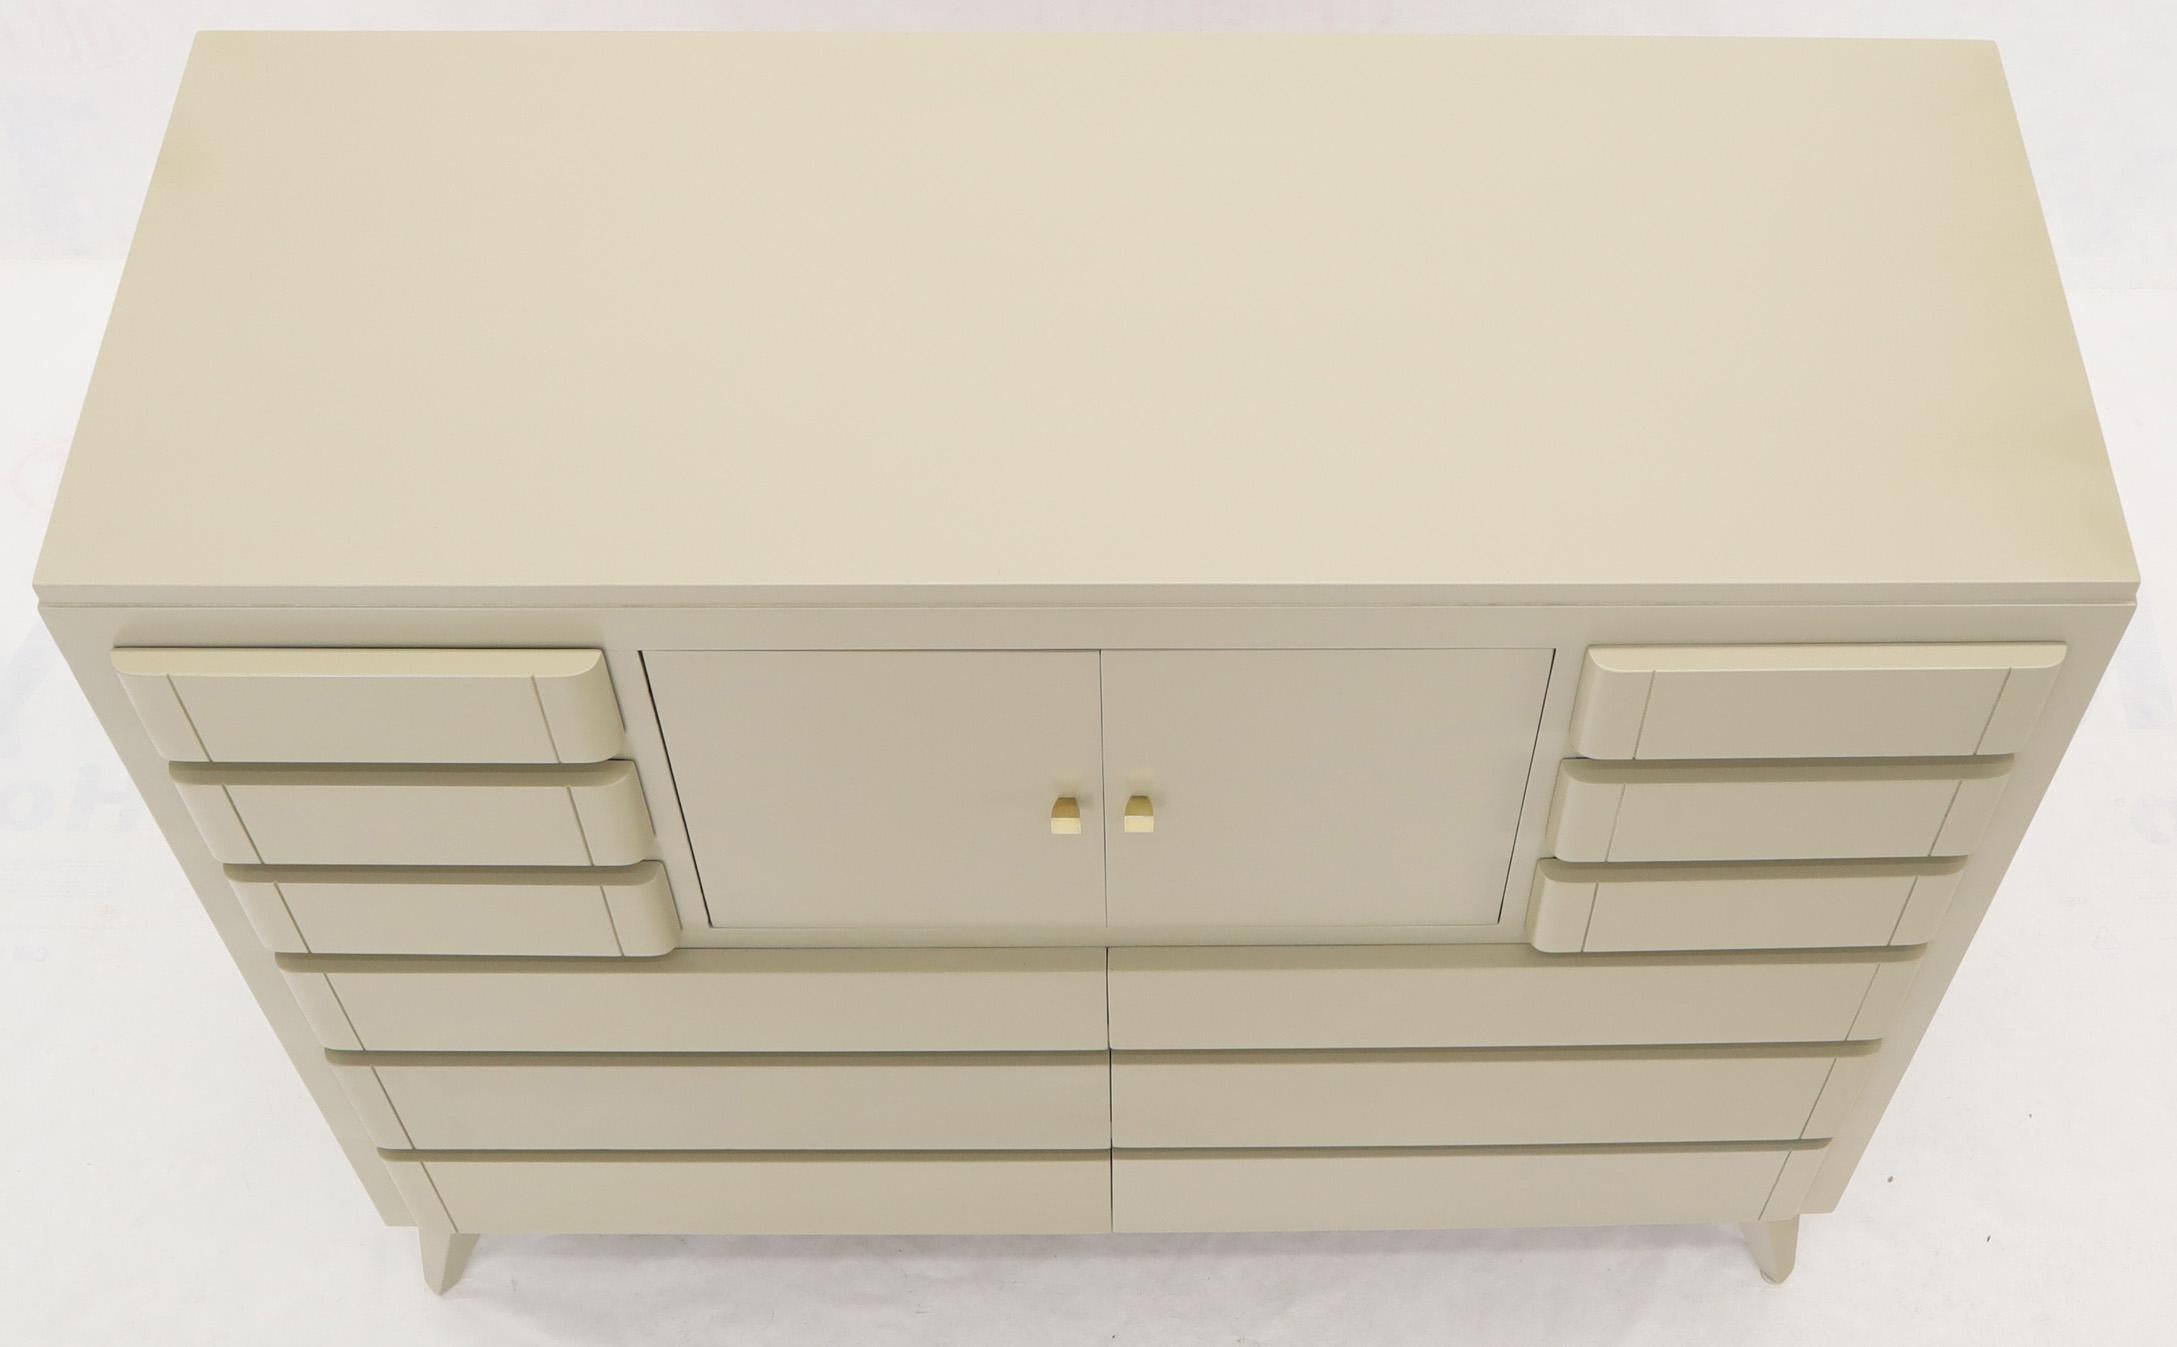 12 inch wide chest of drawers